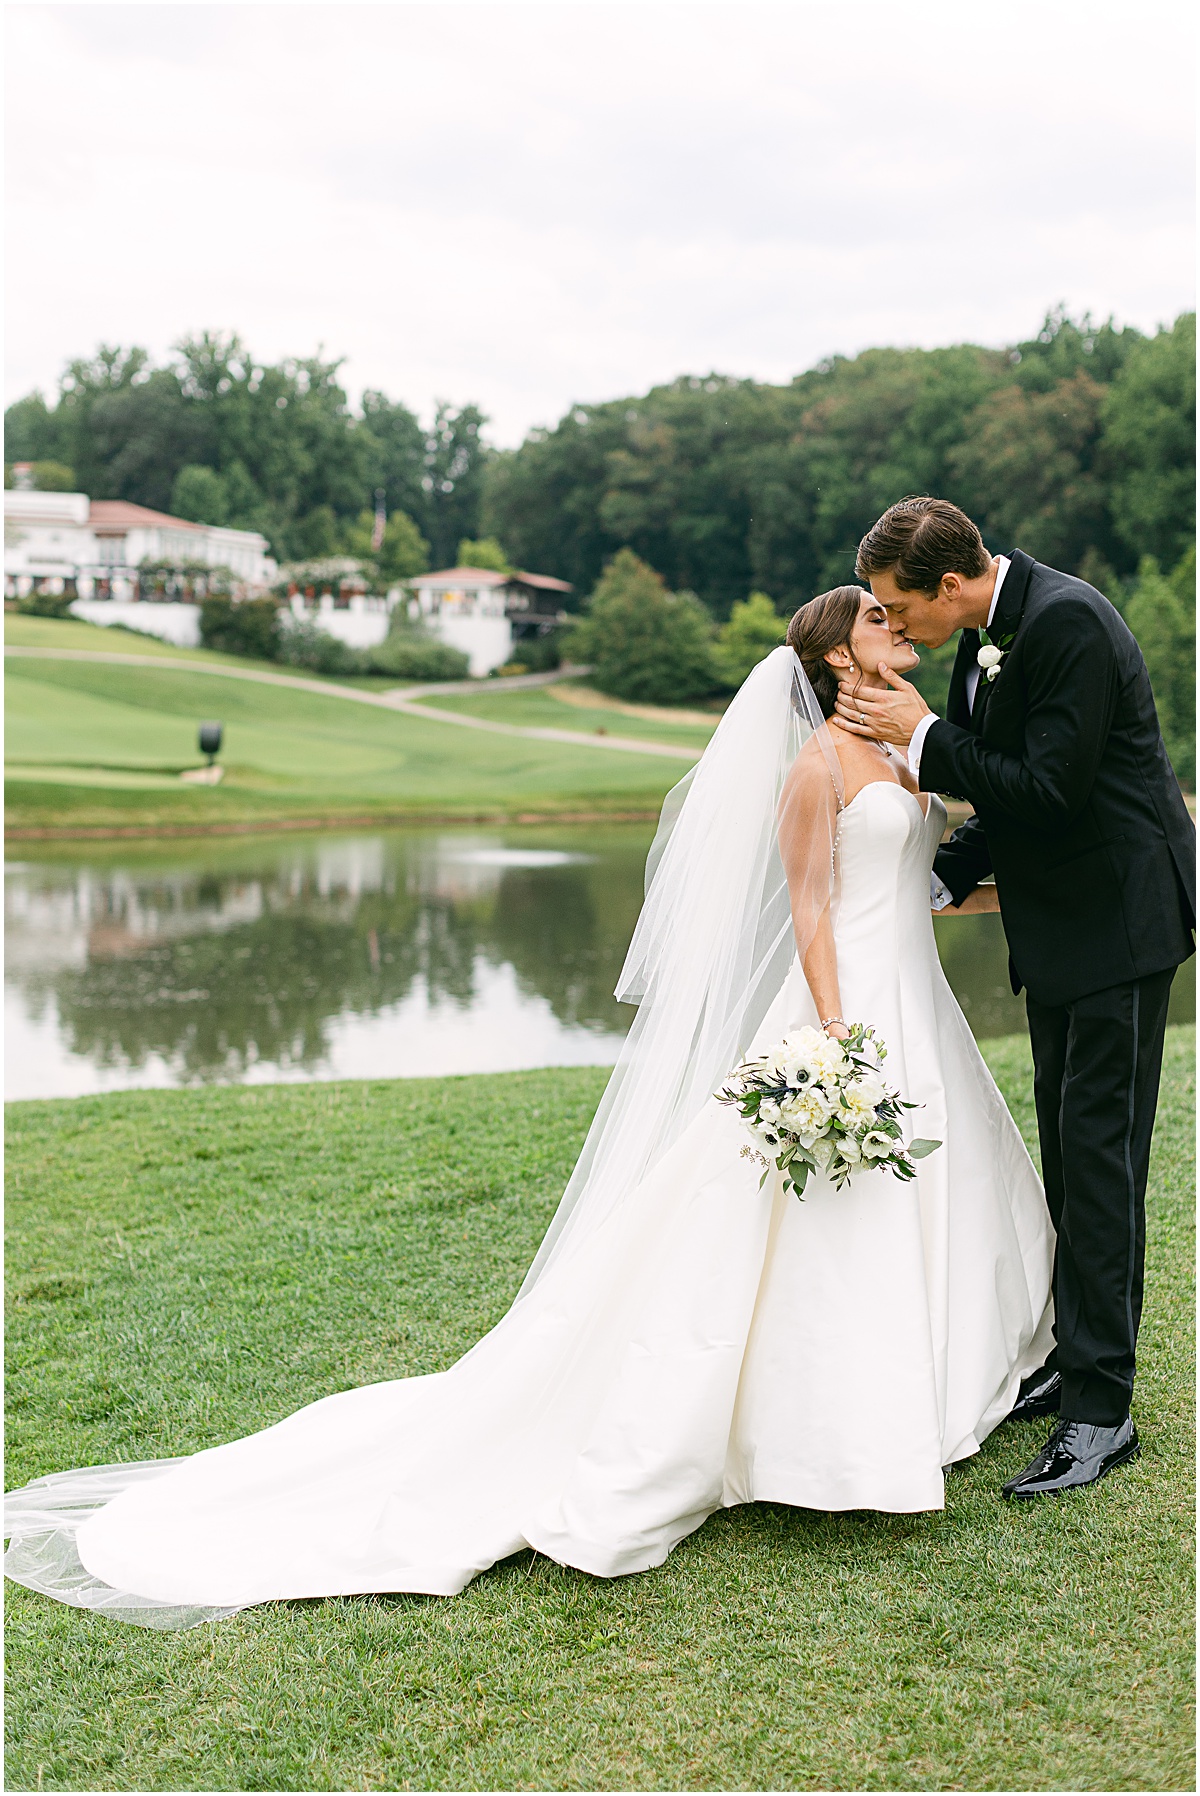 Bride & groom portrait at lemon-themed wedding at Congressional Country Club by Sarah Bradshaw